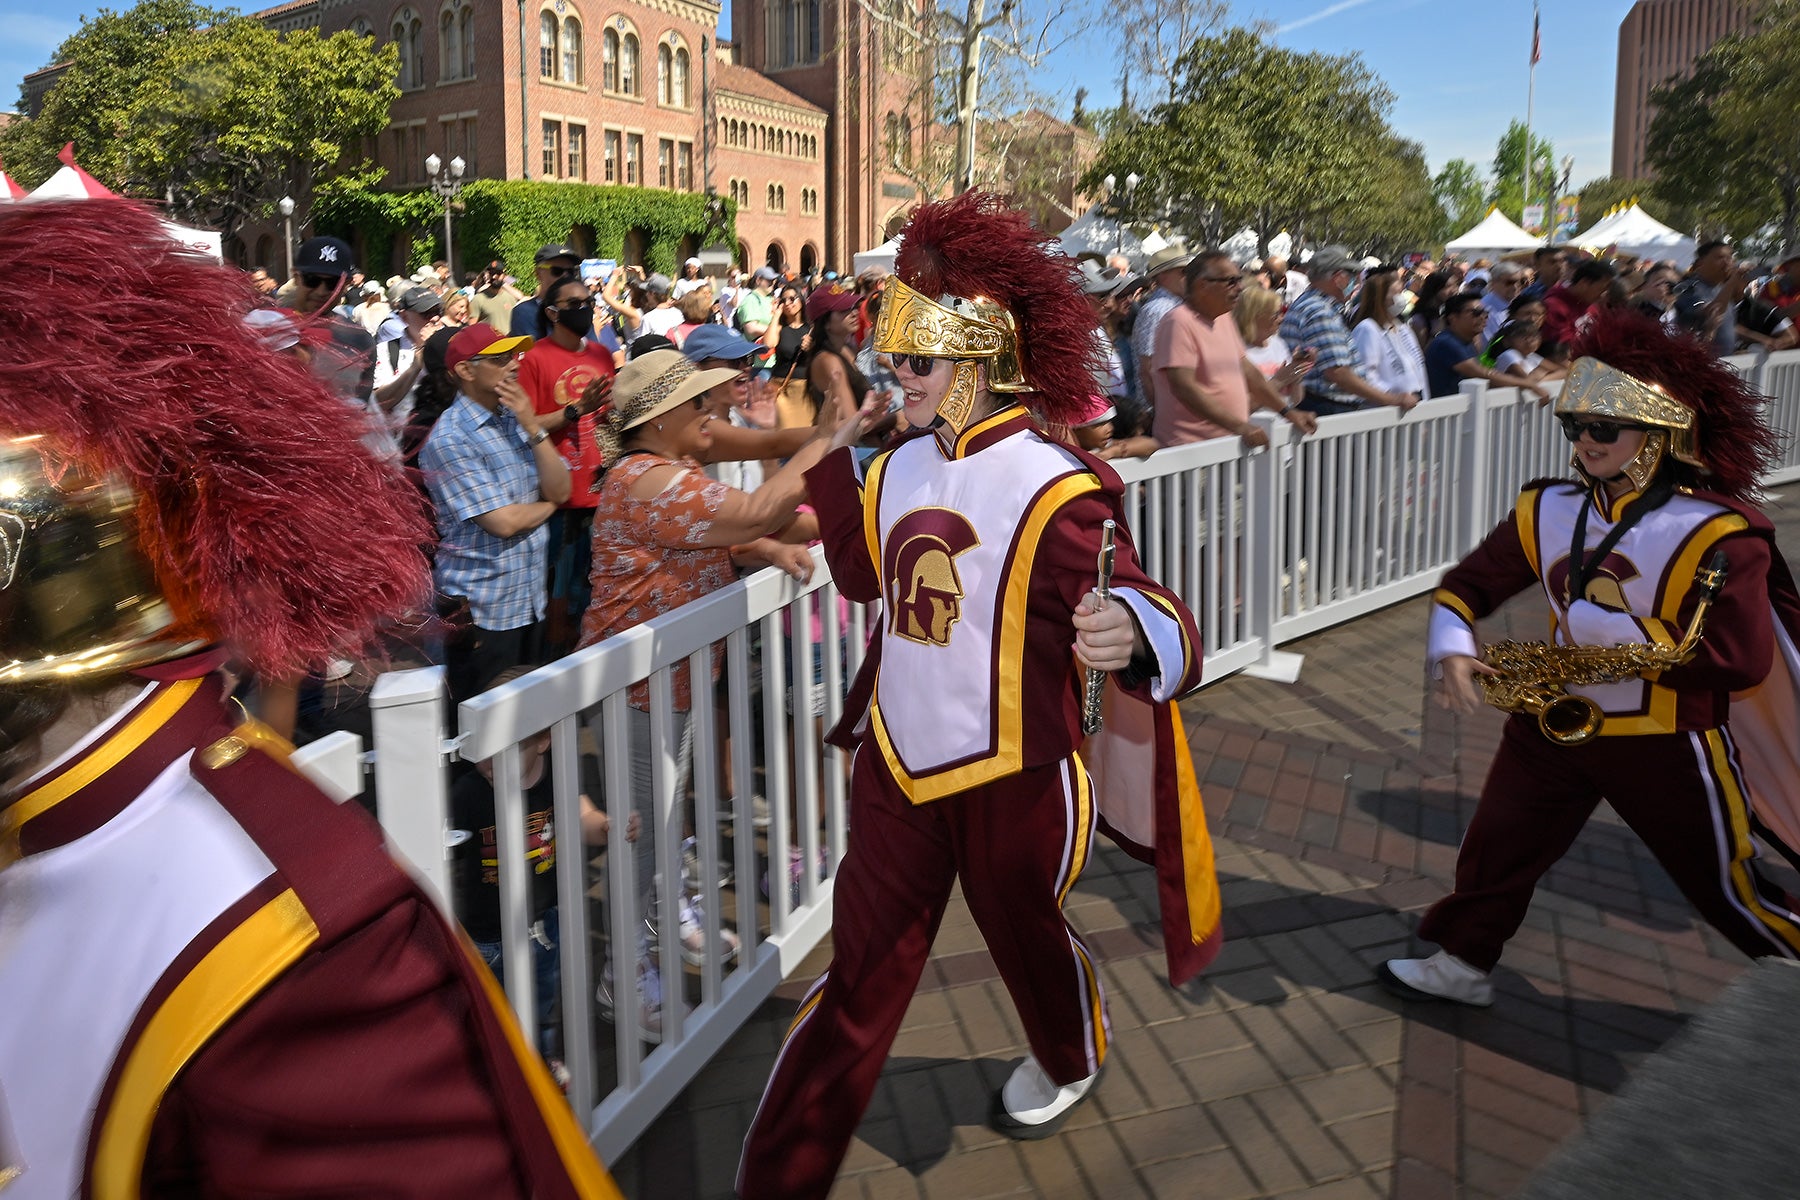 Los Angeles Times Festival of Books at USC: USC Trojan Marching Band